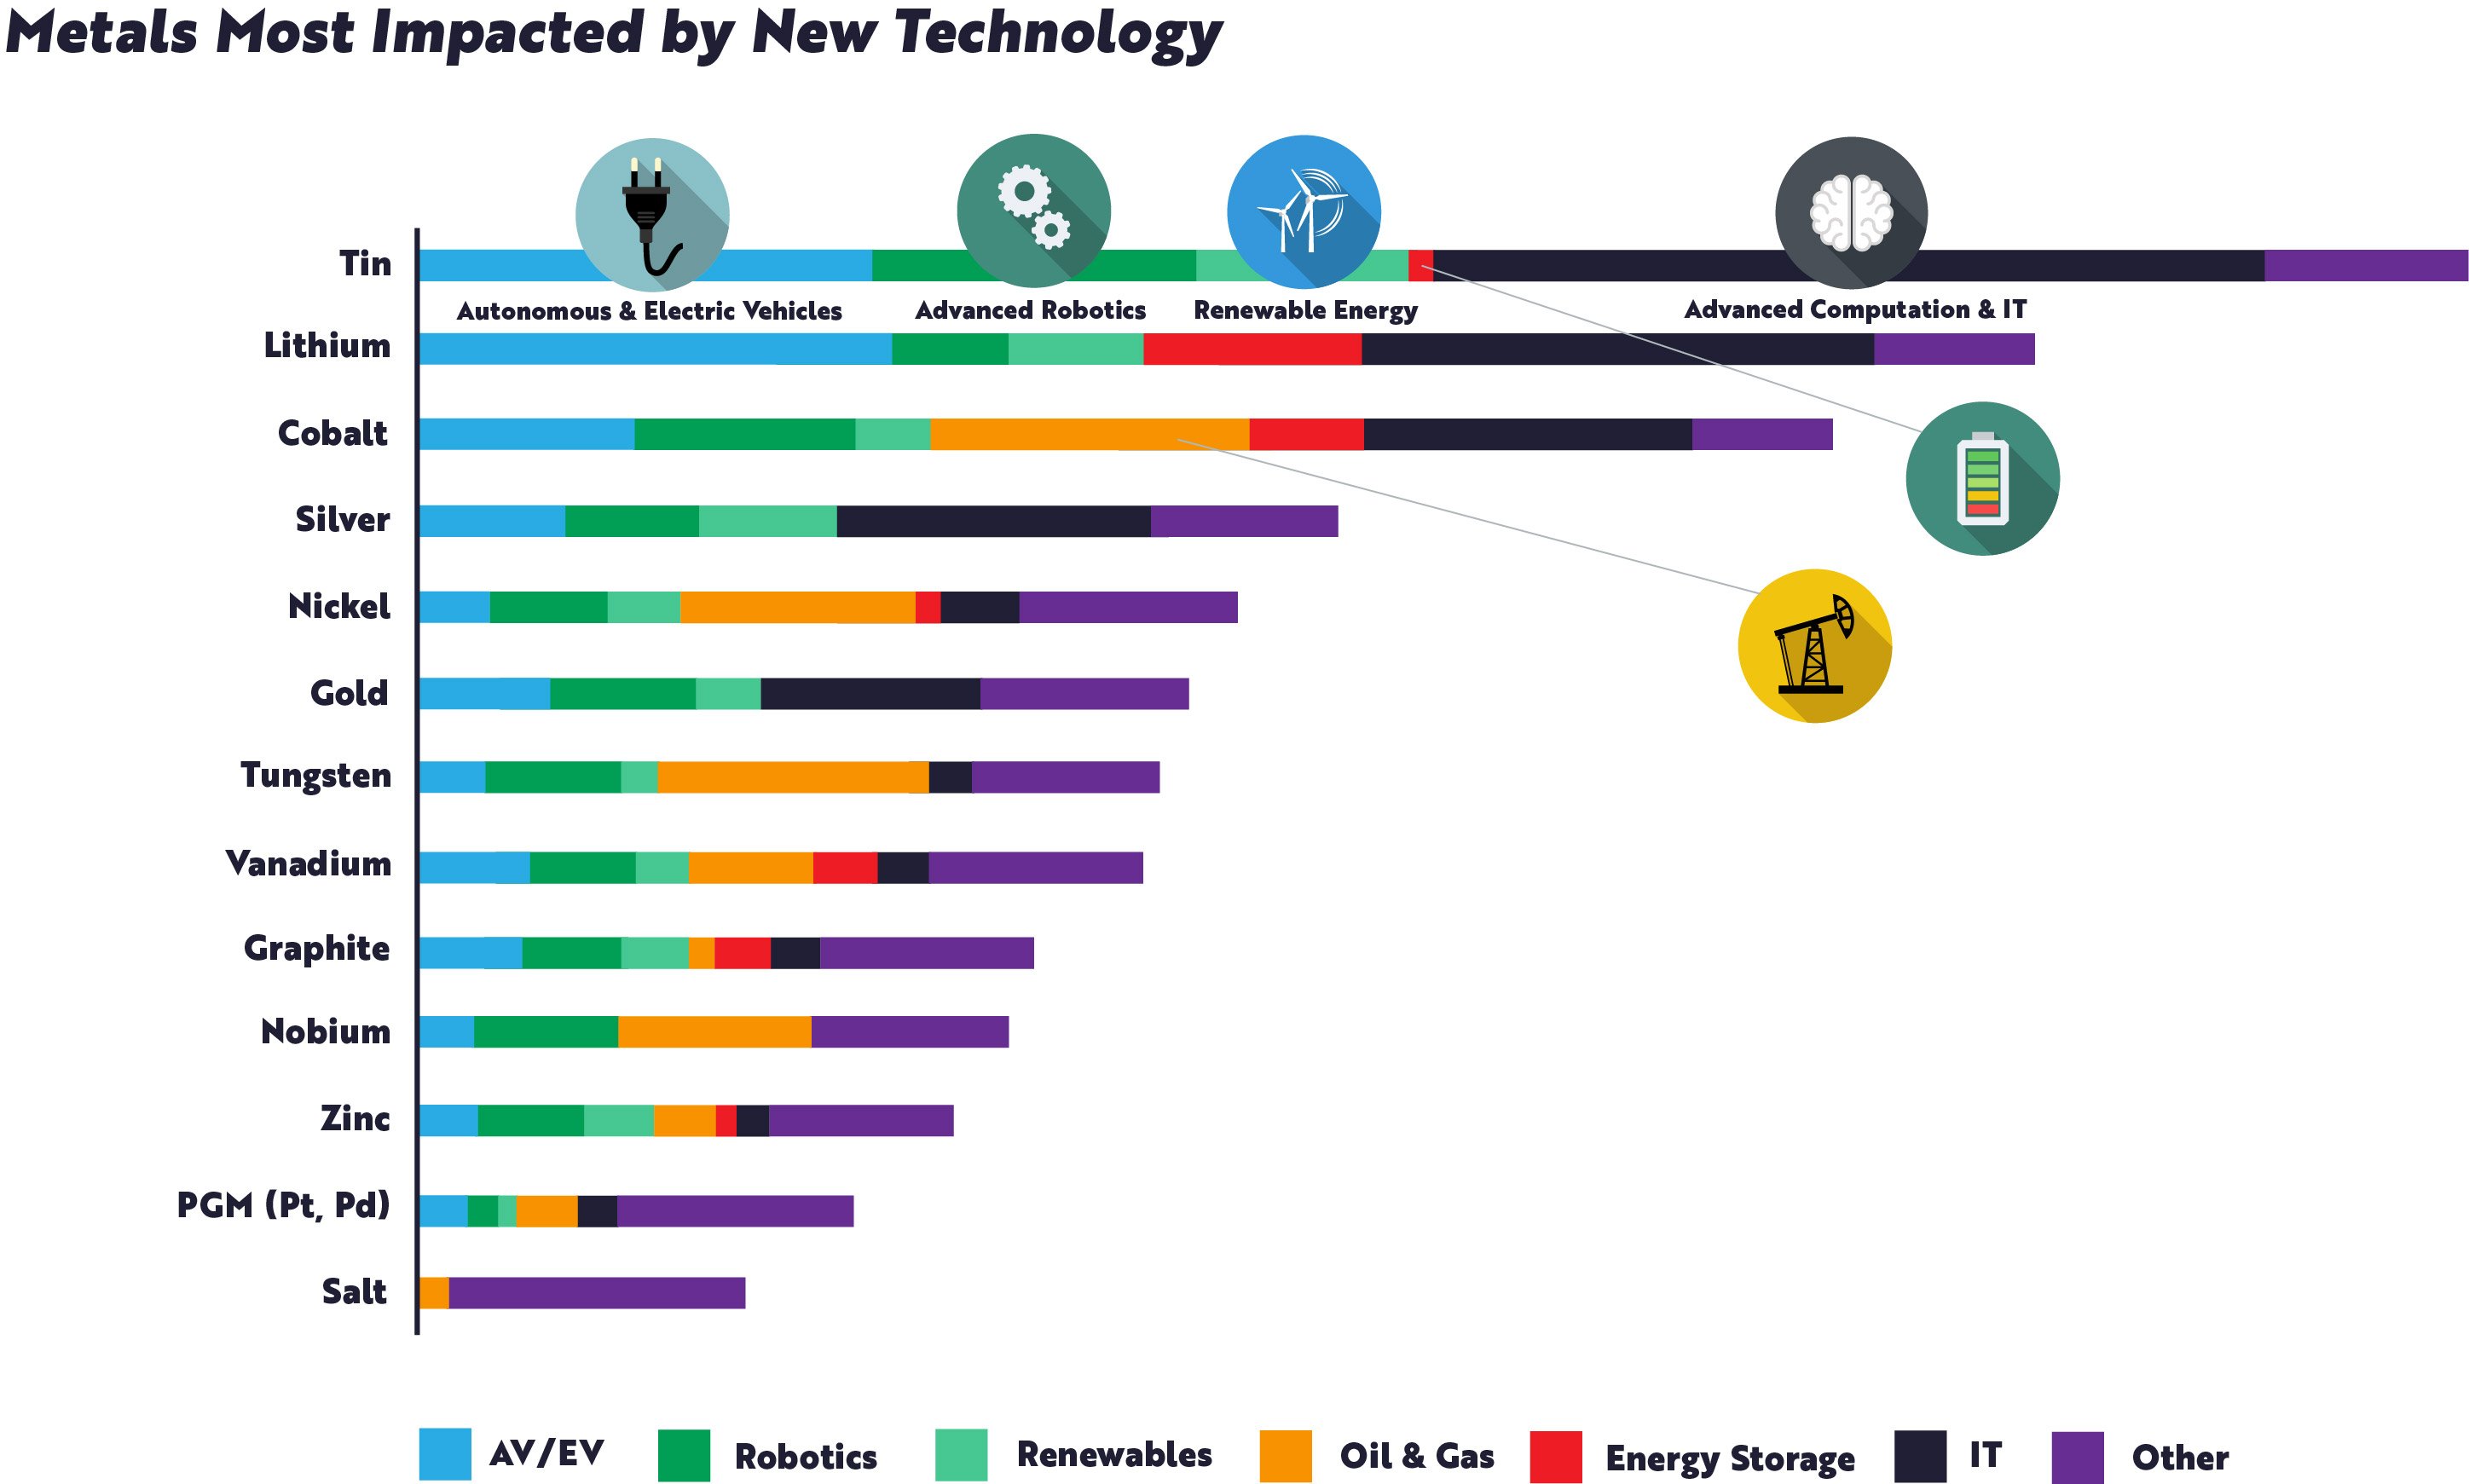 Metals Most Impacted by New Technology